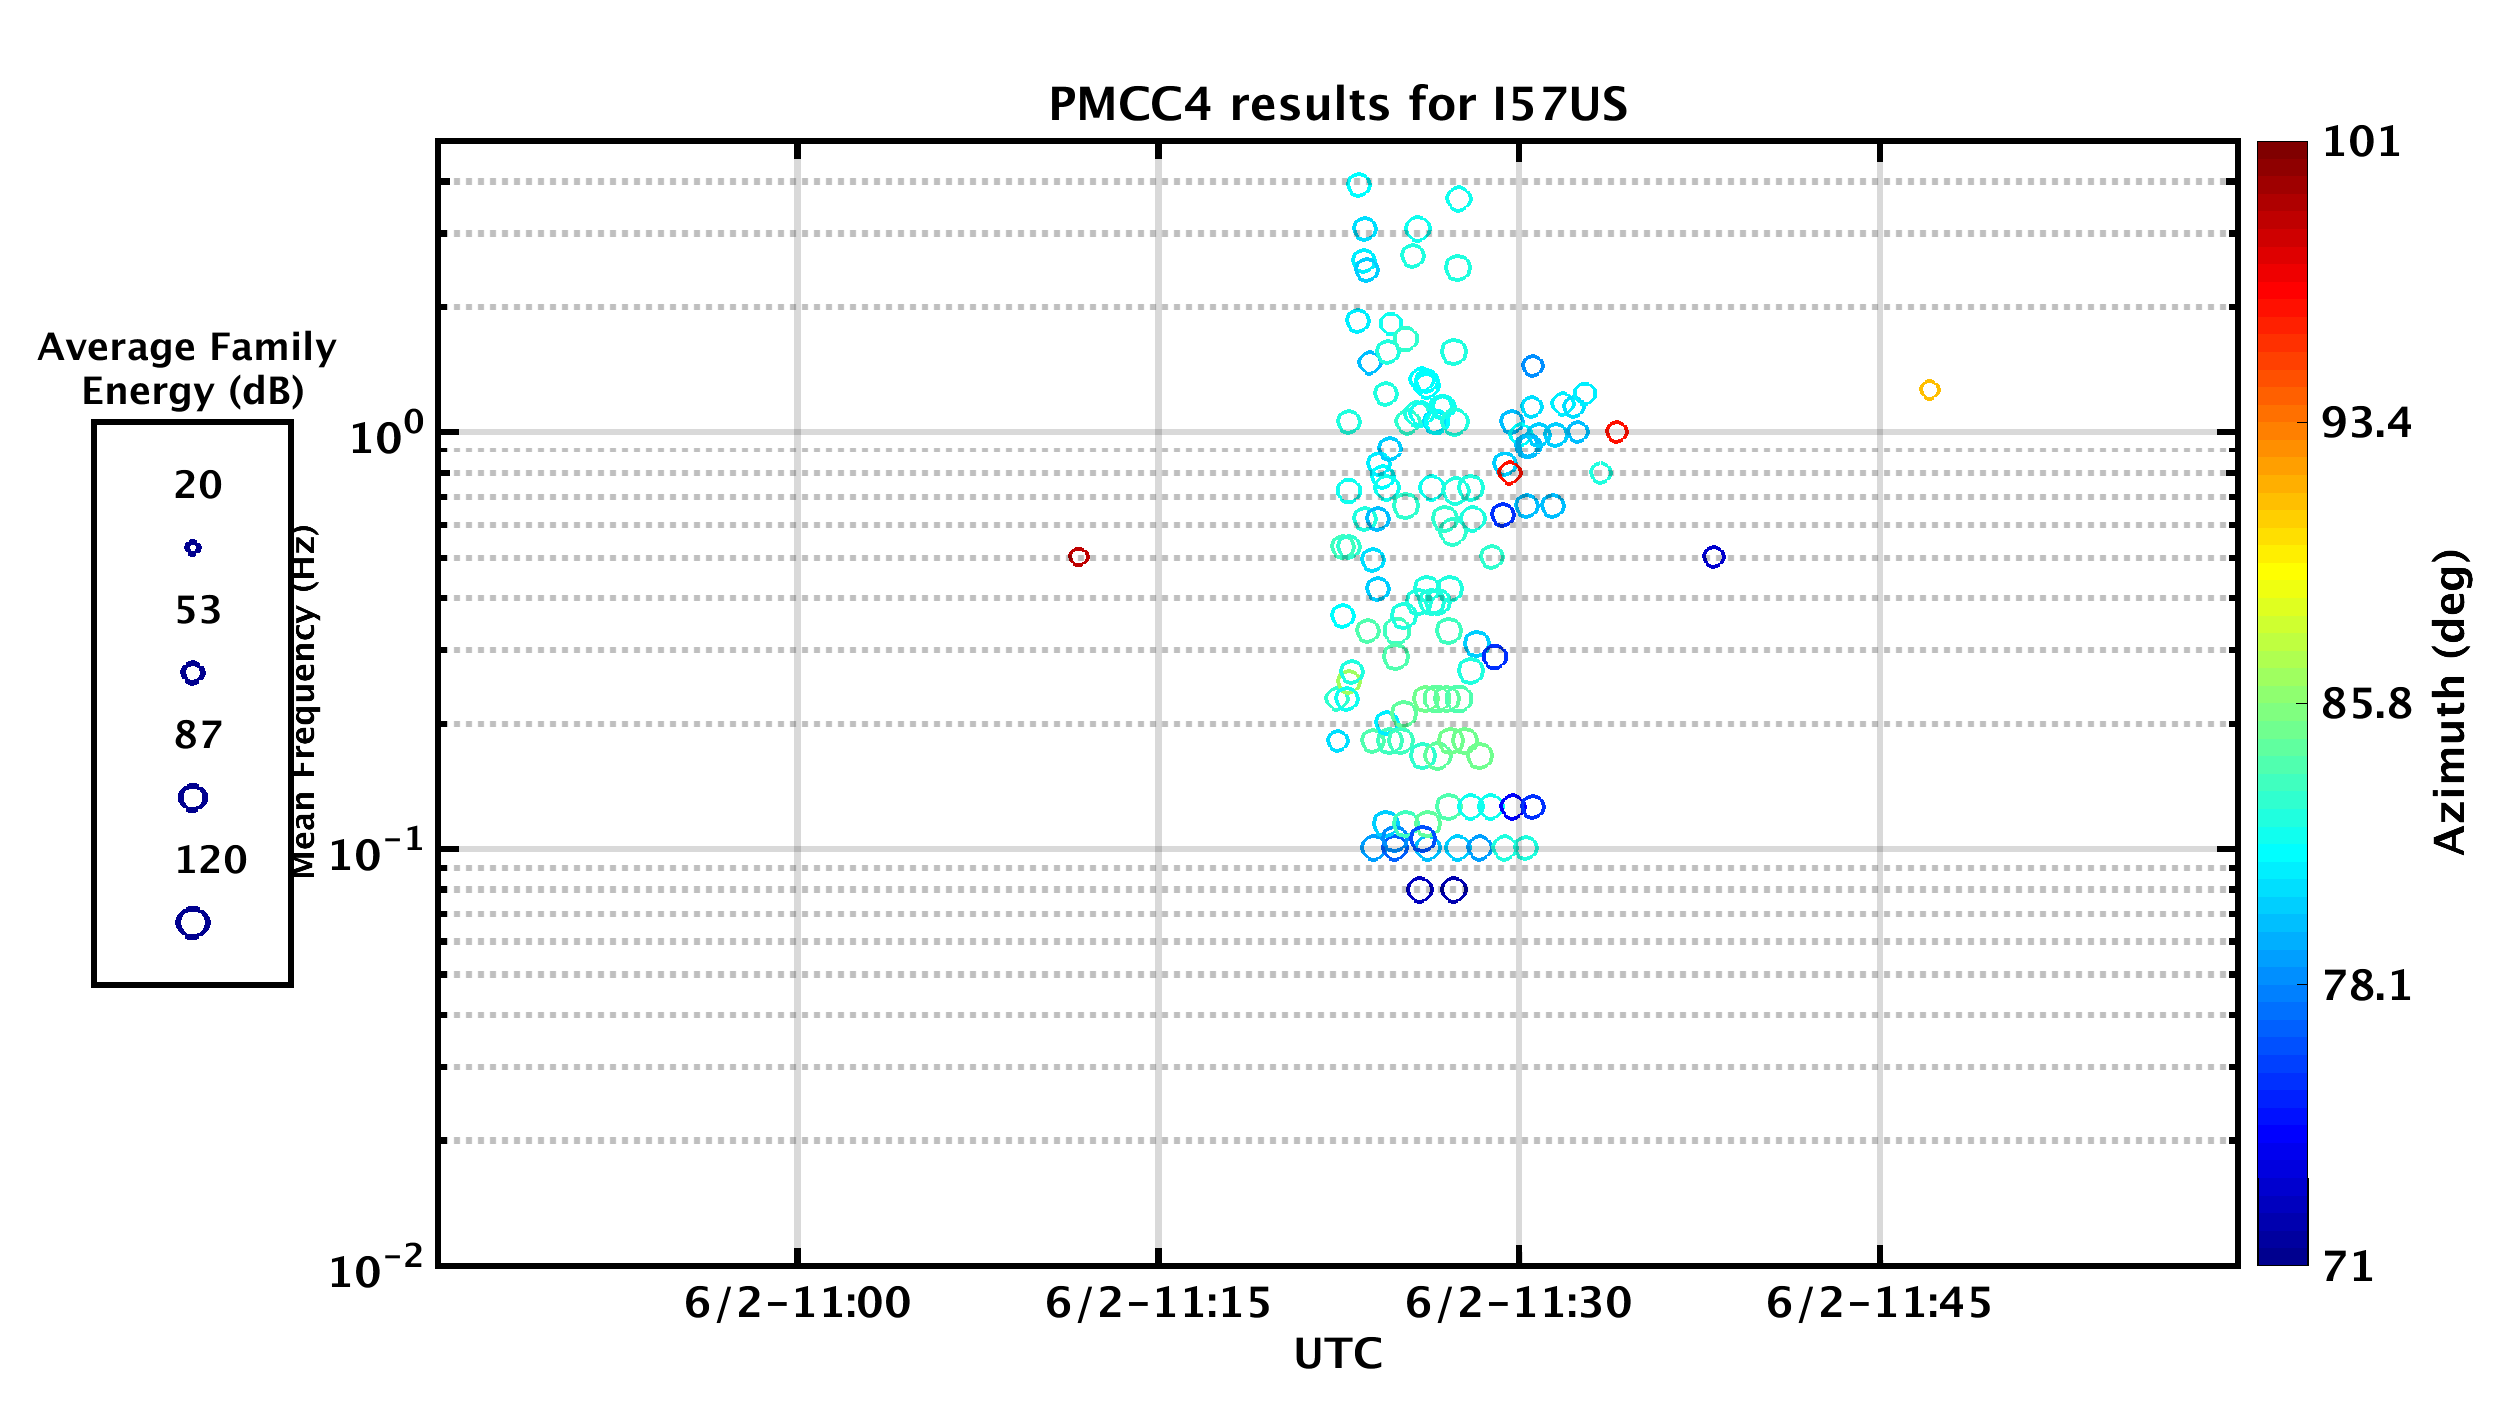 Figure 3: I57US, automatic PMCC results plot. Results plotted are ± 15° of the expected back azimuth (86°) with a time window of ± 1hour from the expected arrival times calculated with 0.25-0.45 km/s celerities. The timing and direction of the signal is consistent with the expected values from the event.